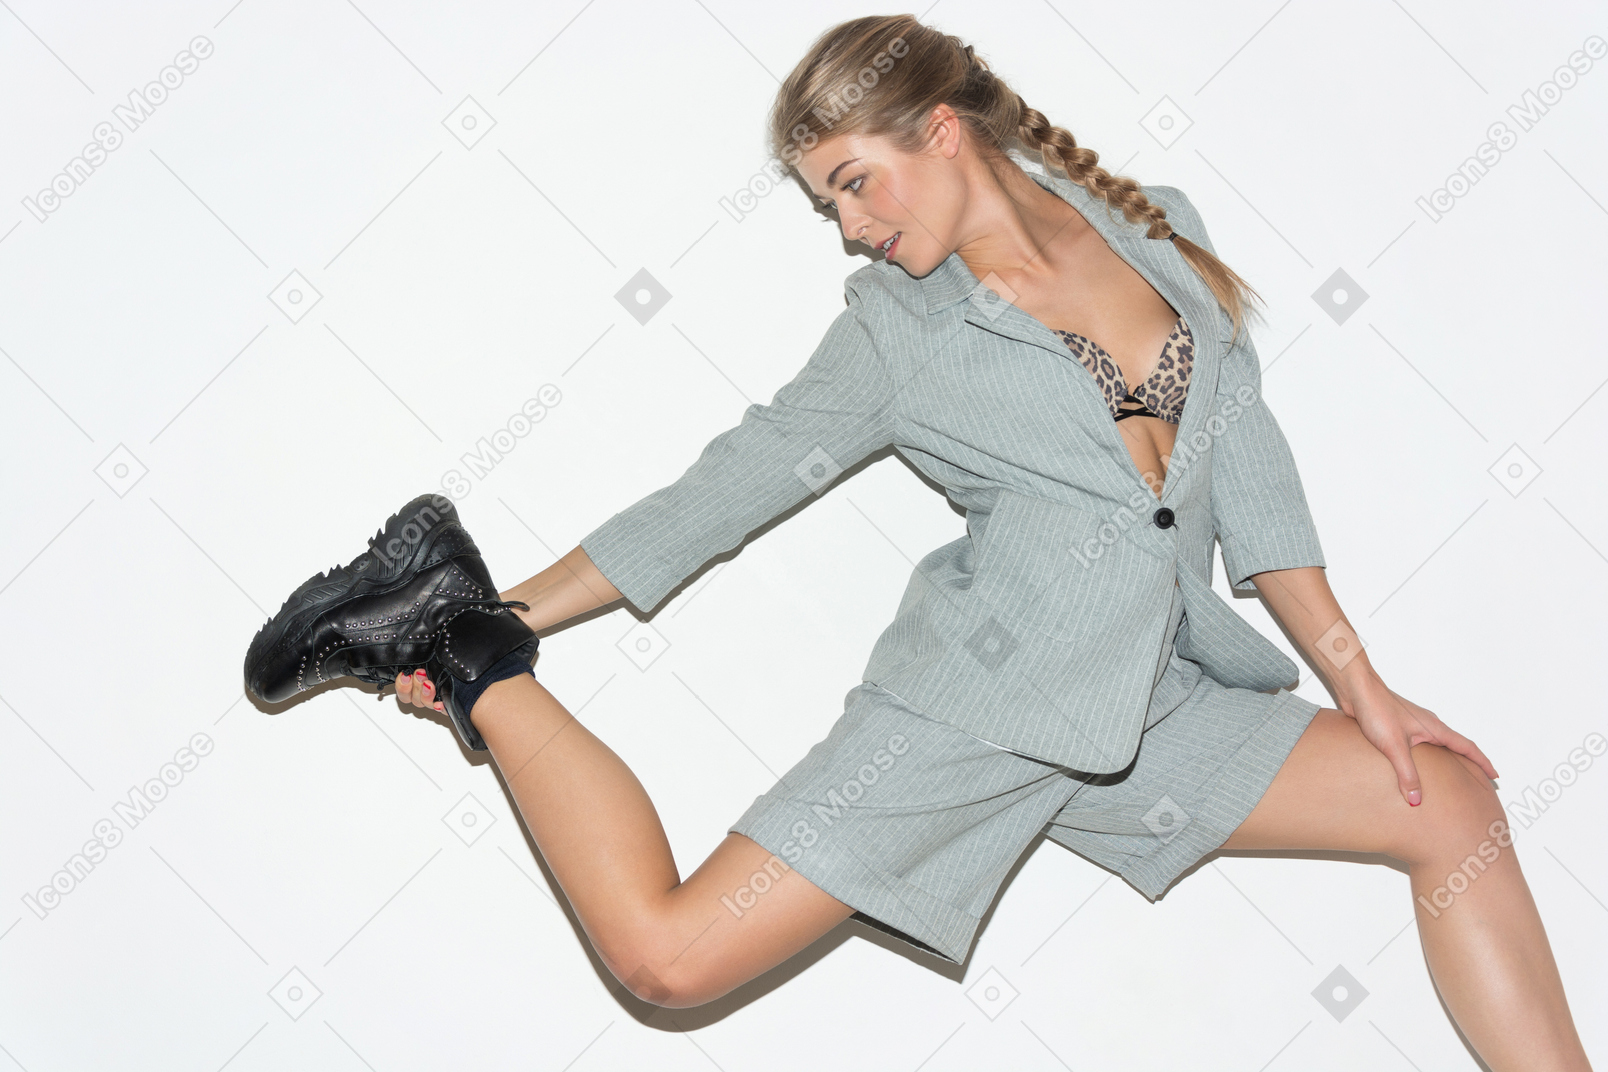 A young woman stretching her legs